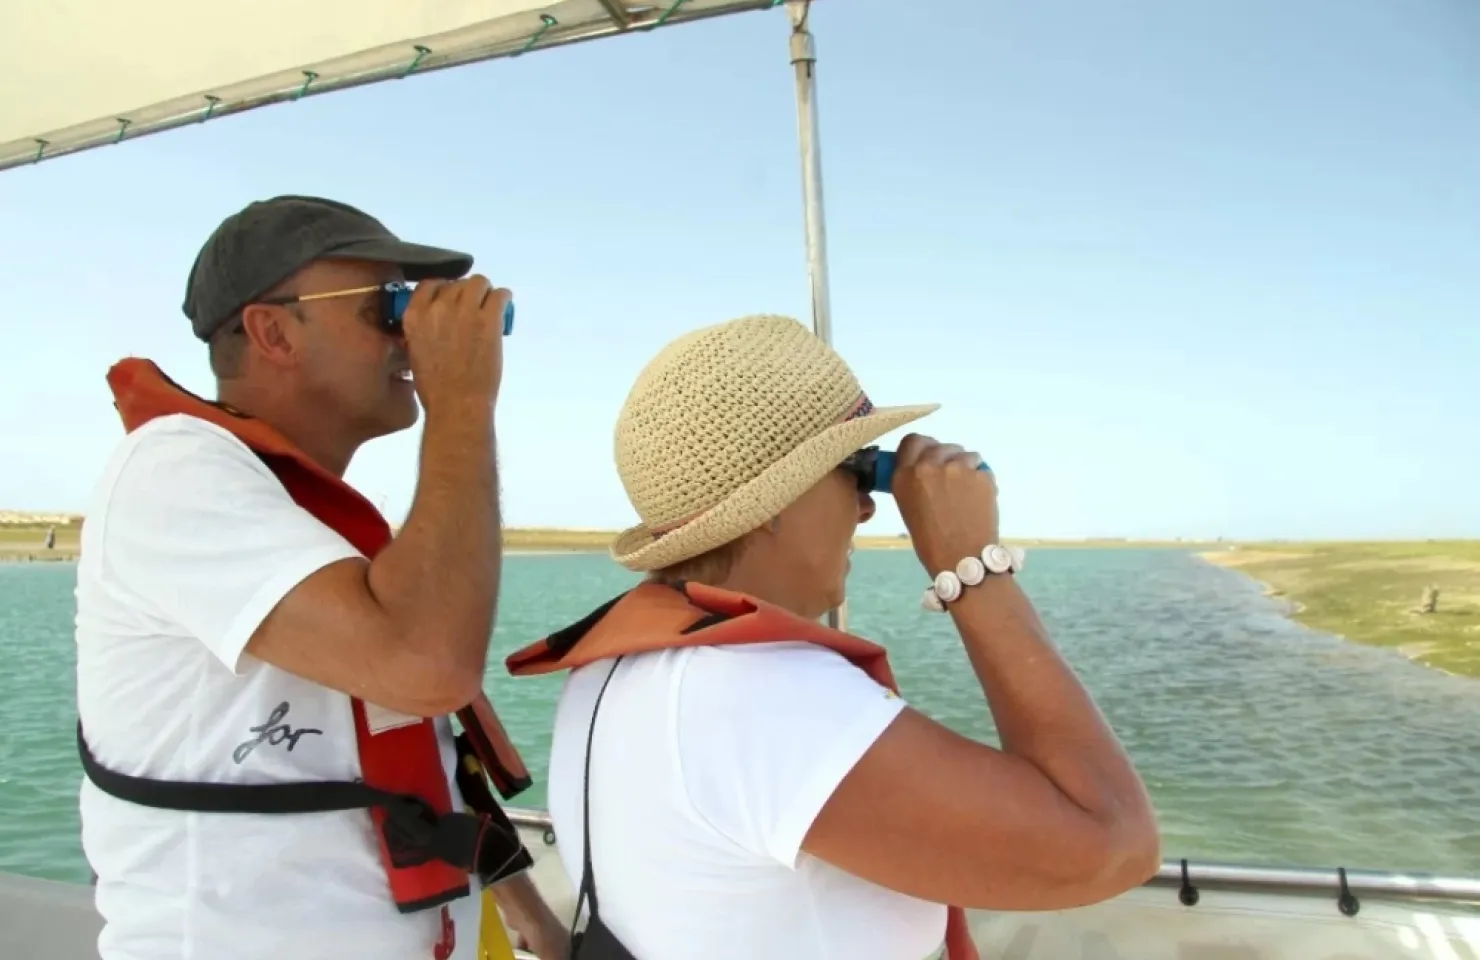 Birdwatching in Ria Formosa from Tavira - Activities and Things to Do in Ria Formosa Natural Park